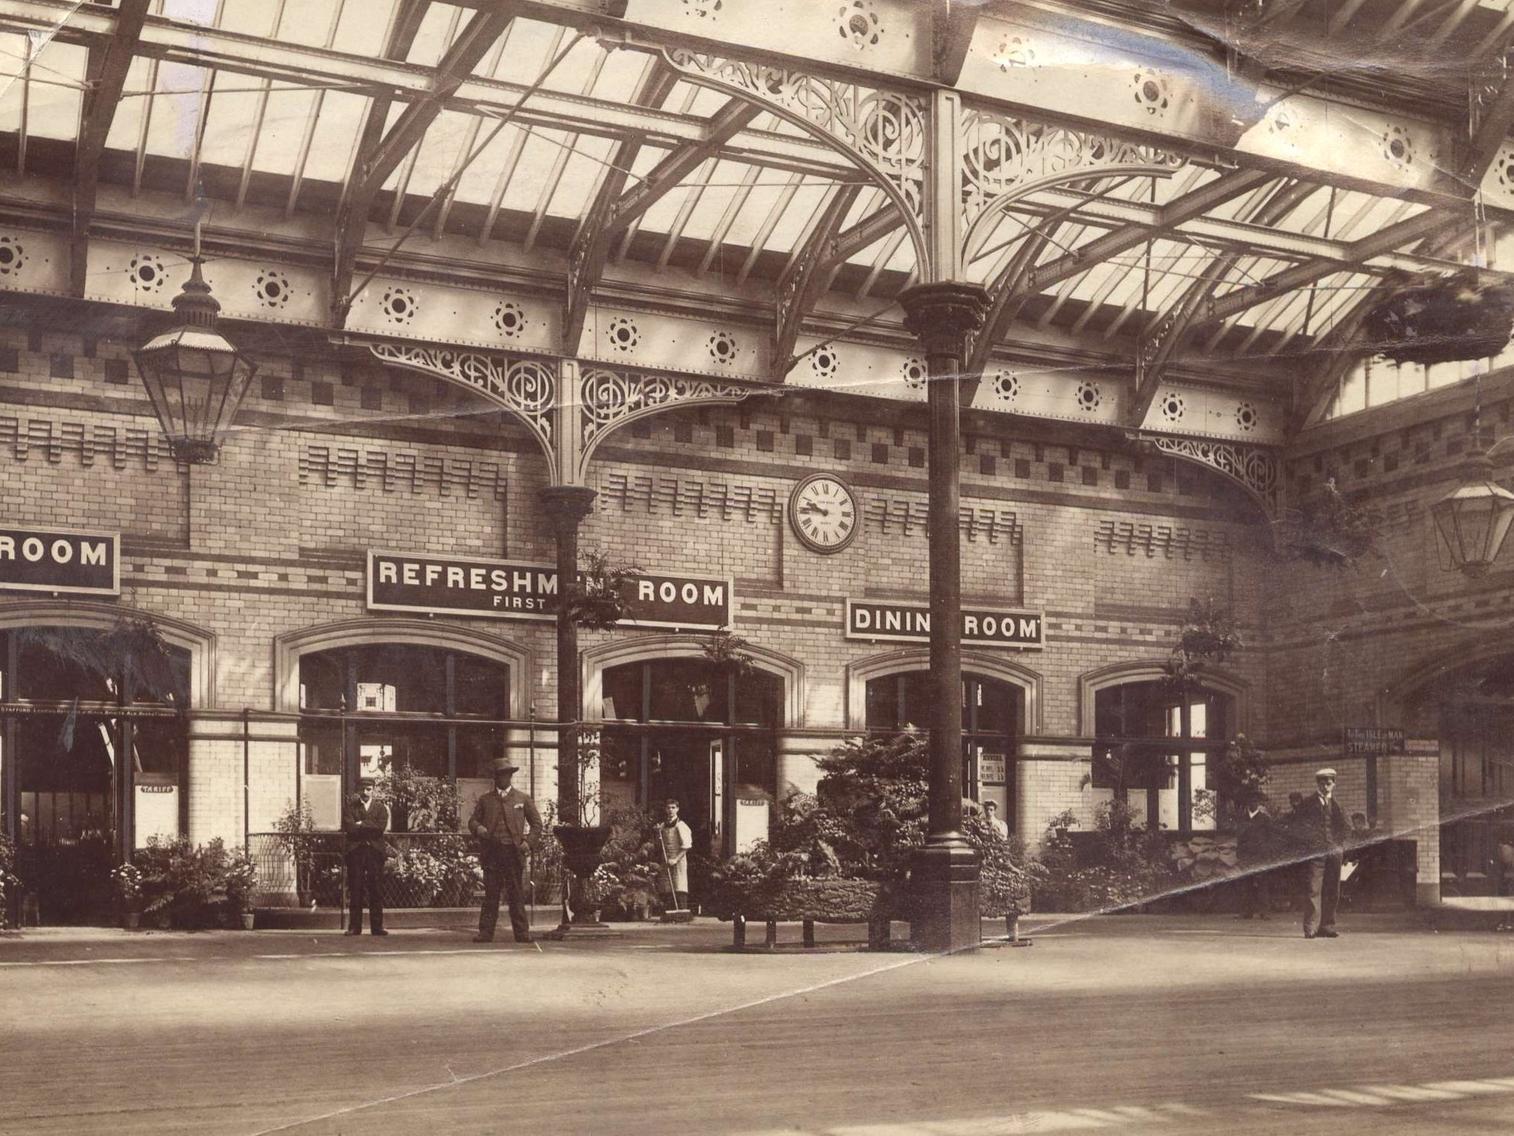 Fleetwood railway station in 1890. According to the hand-written caption on the back of the photo, from the Fleetwood Weekly News' archive, it was 9.45am. The photographer (unknown) writes: "The air is warm and the floral decoration has a summer lushness"